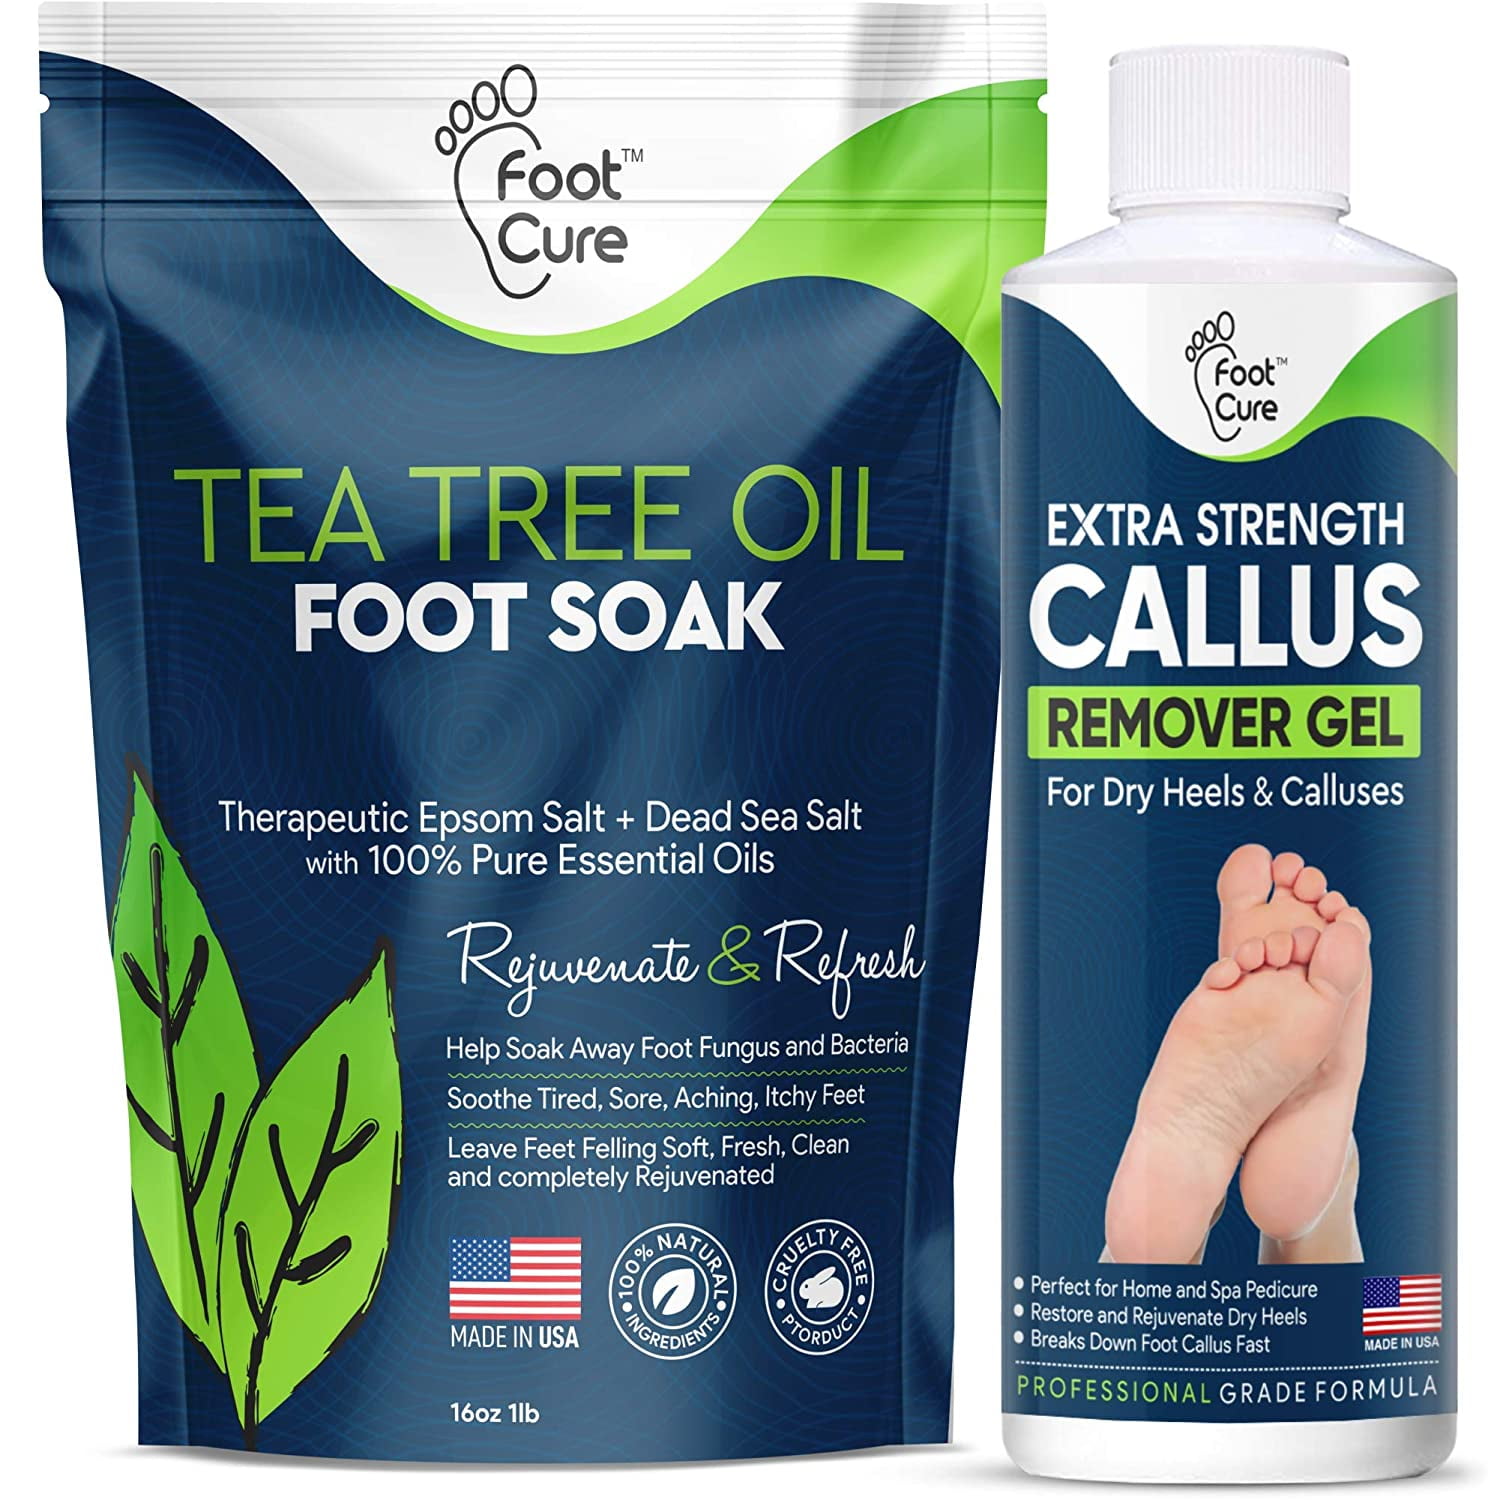 Daily Remedy Callus Remover Kit Includes Tea Tree Oil Callus Remover Gel &  Pumice Stone Professional Scrubber to Remove Tough Heel Pedicure Products  for Feet Gel + Pumice